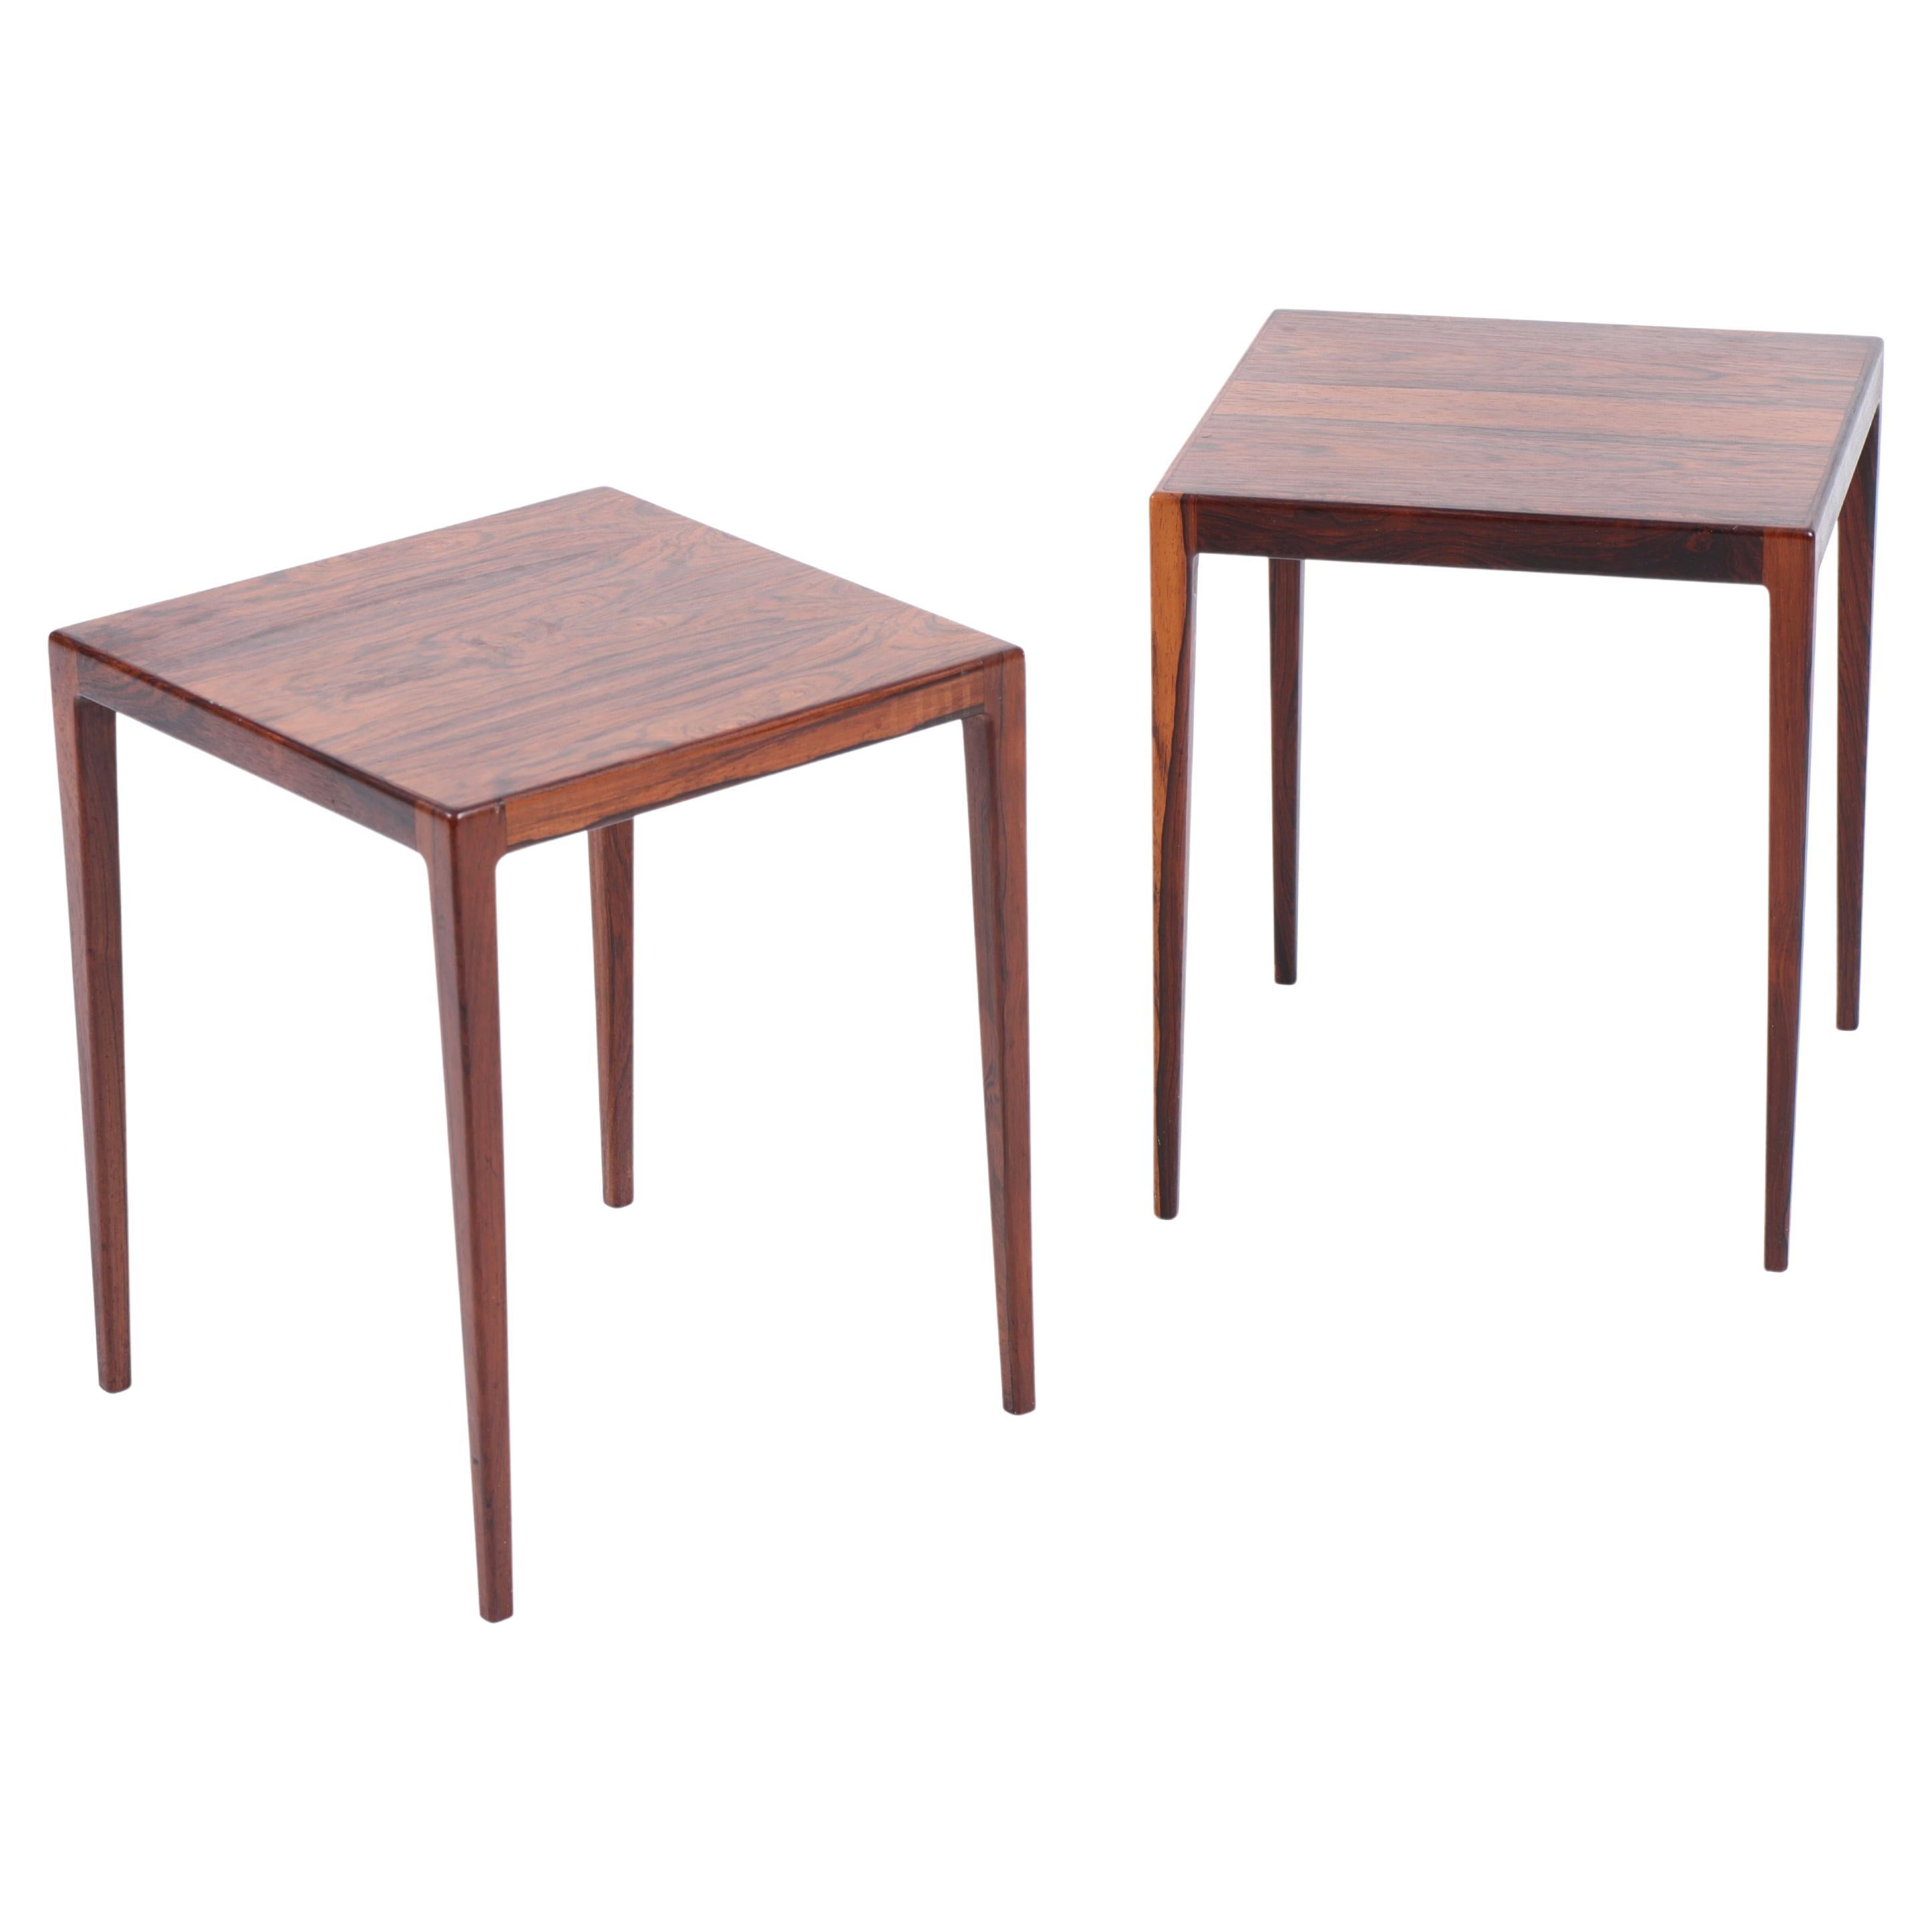 Pair of Midcentury Side Tables in Rosewood, Made in Denmark, 1960s For Sale